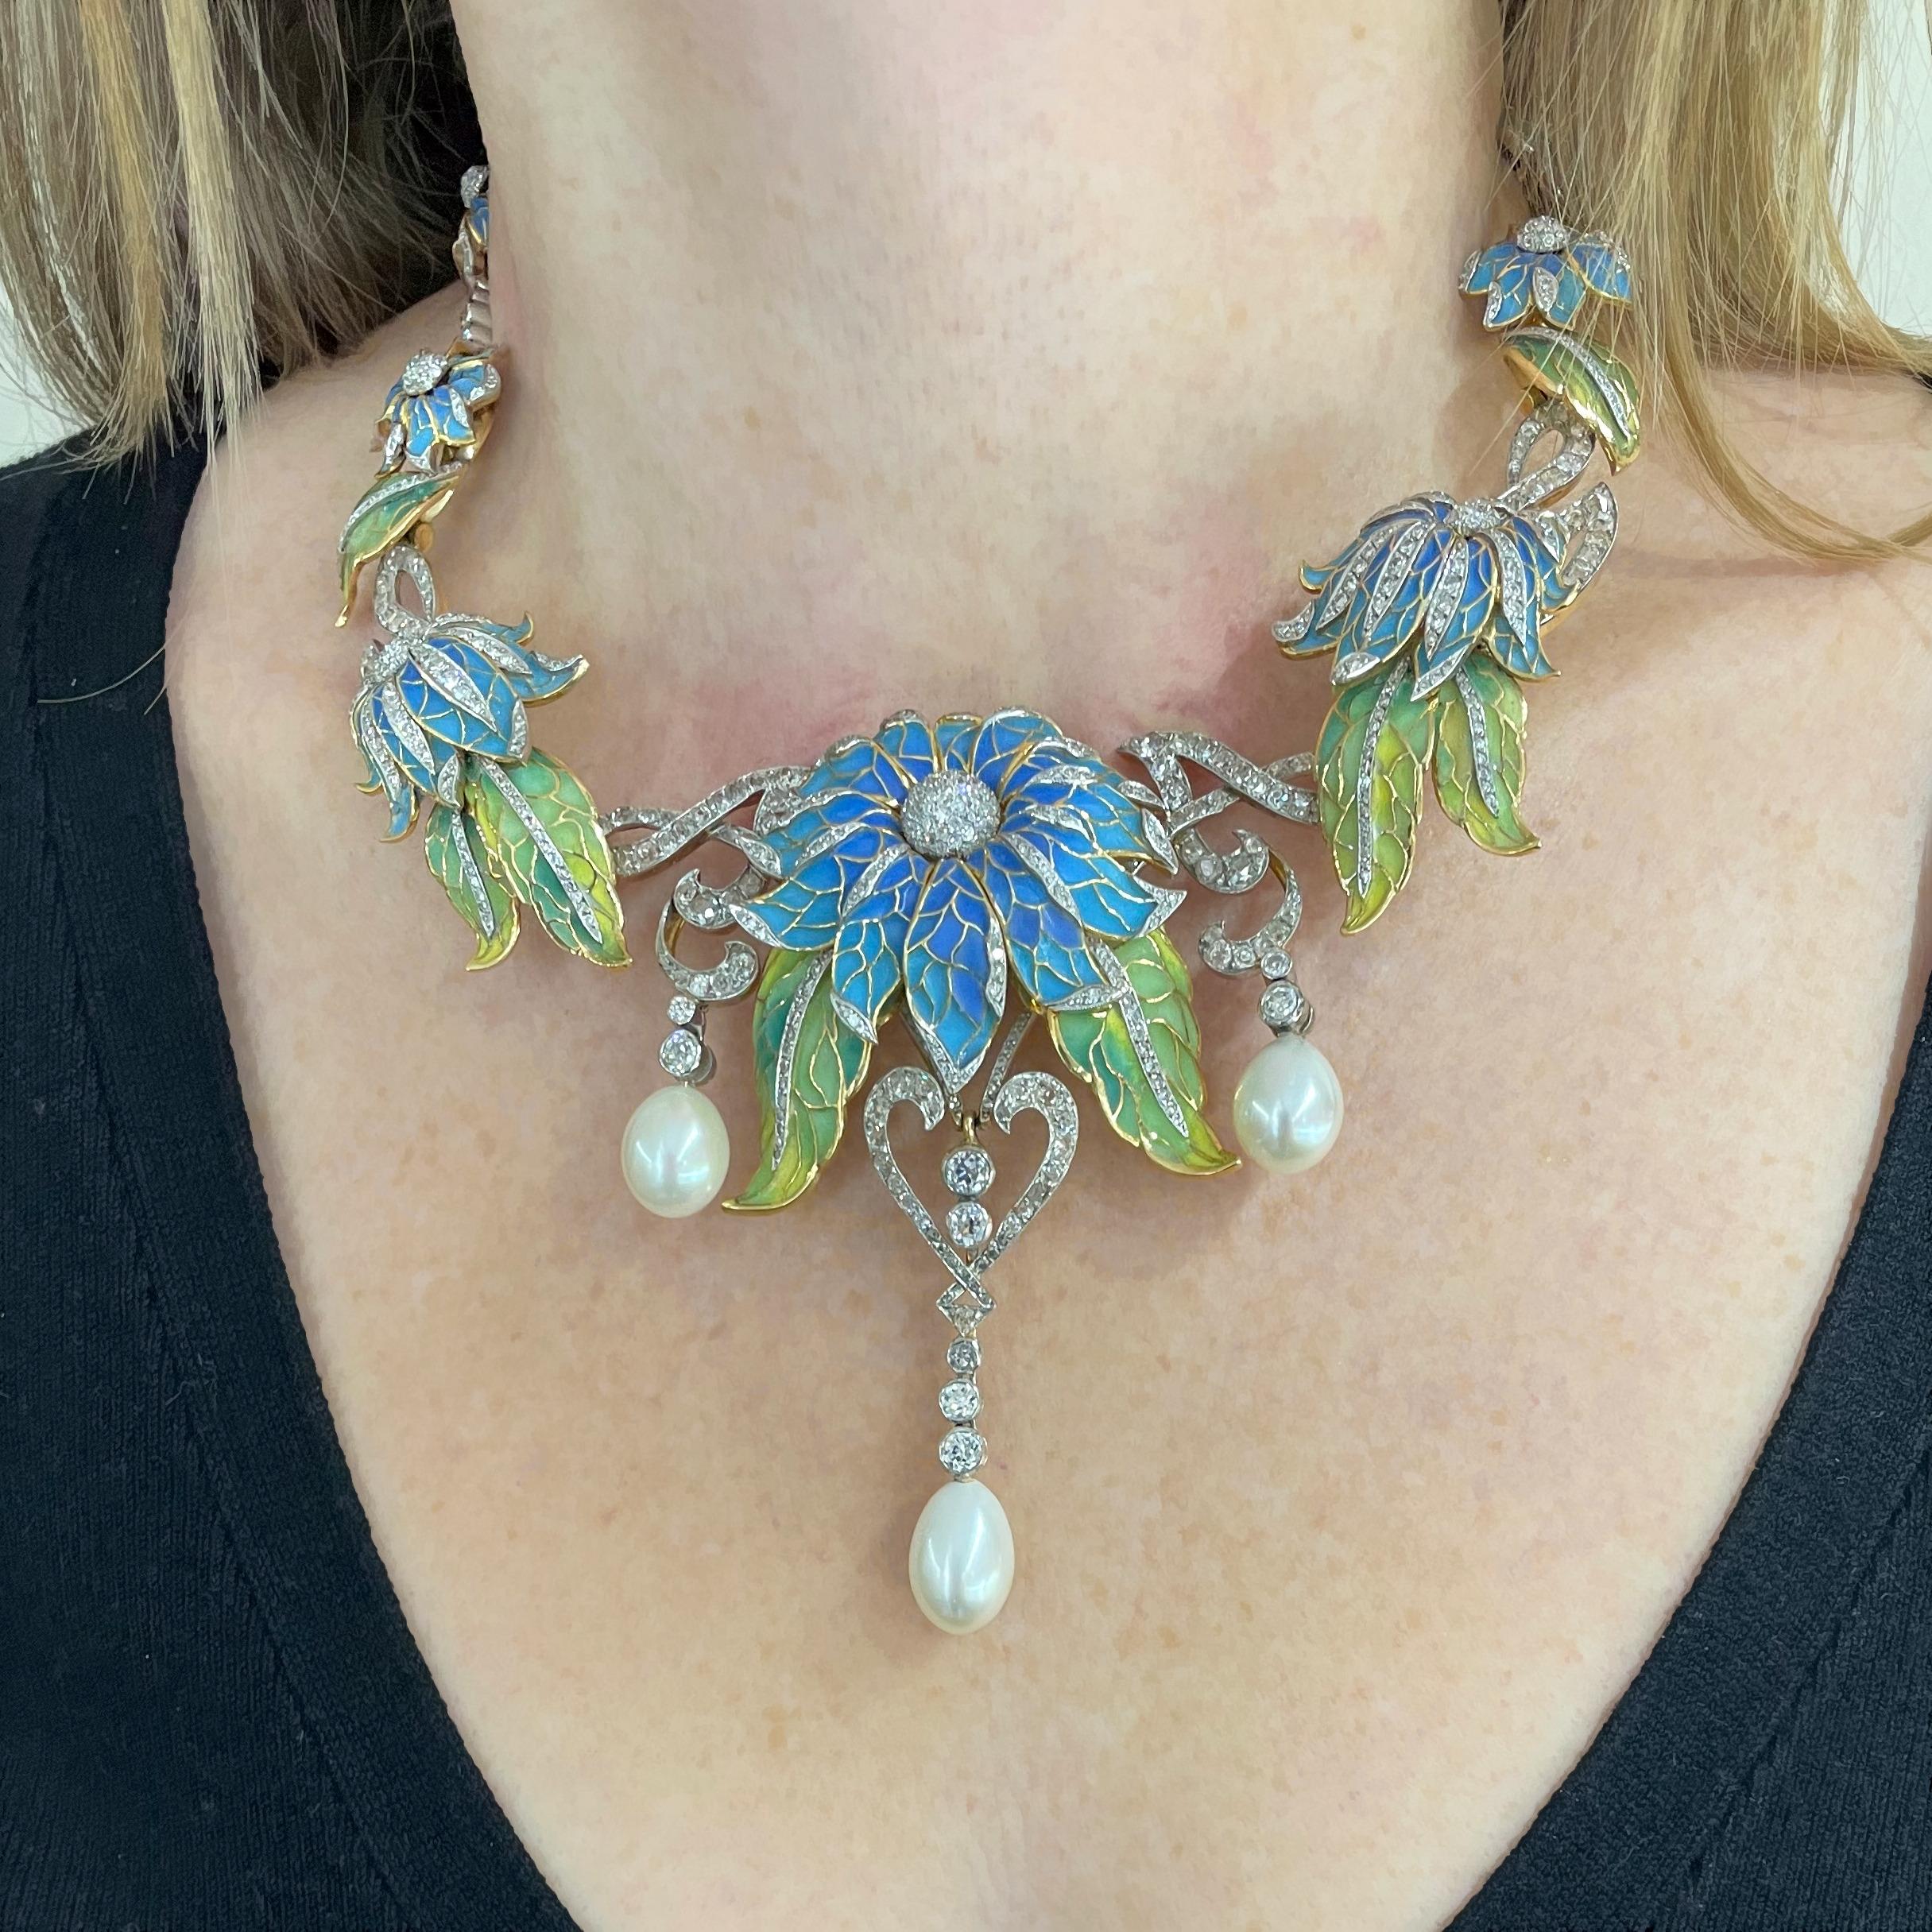 A Moira Collection, plique-à-jour enamel flower necklace, with sky blue plique-à-jour enamel flowers, and green plique-à-jour leaves, with old-cut and eight-cut diamonds and three large cultured drop pearls at the front, mounted in silver-upon-gold.